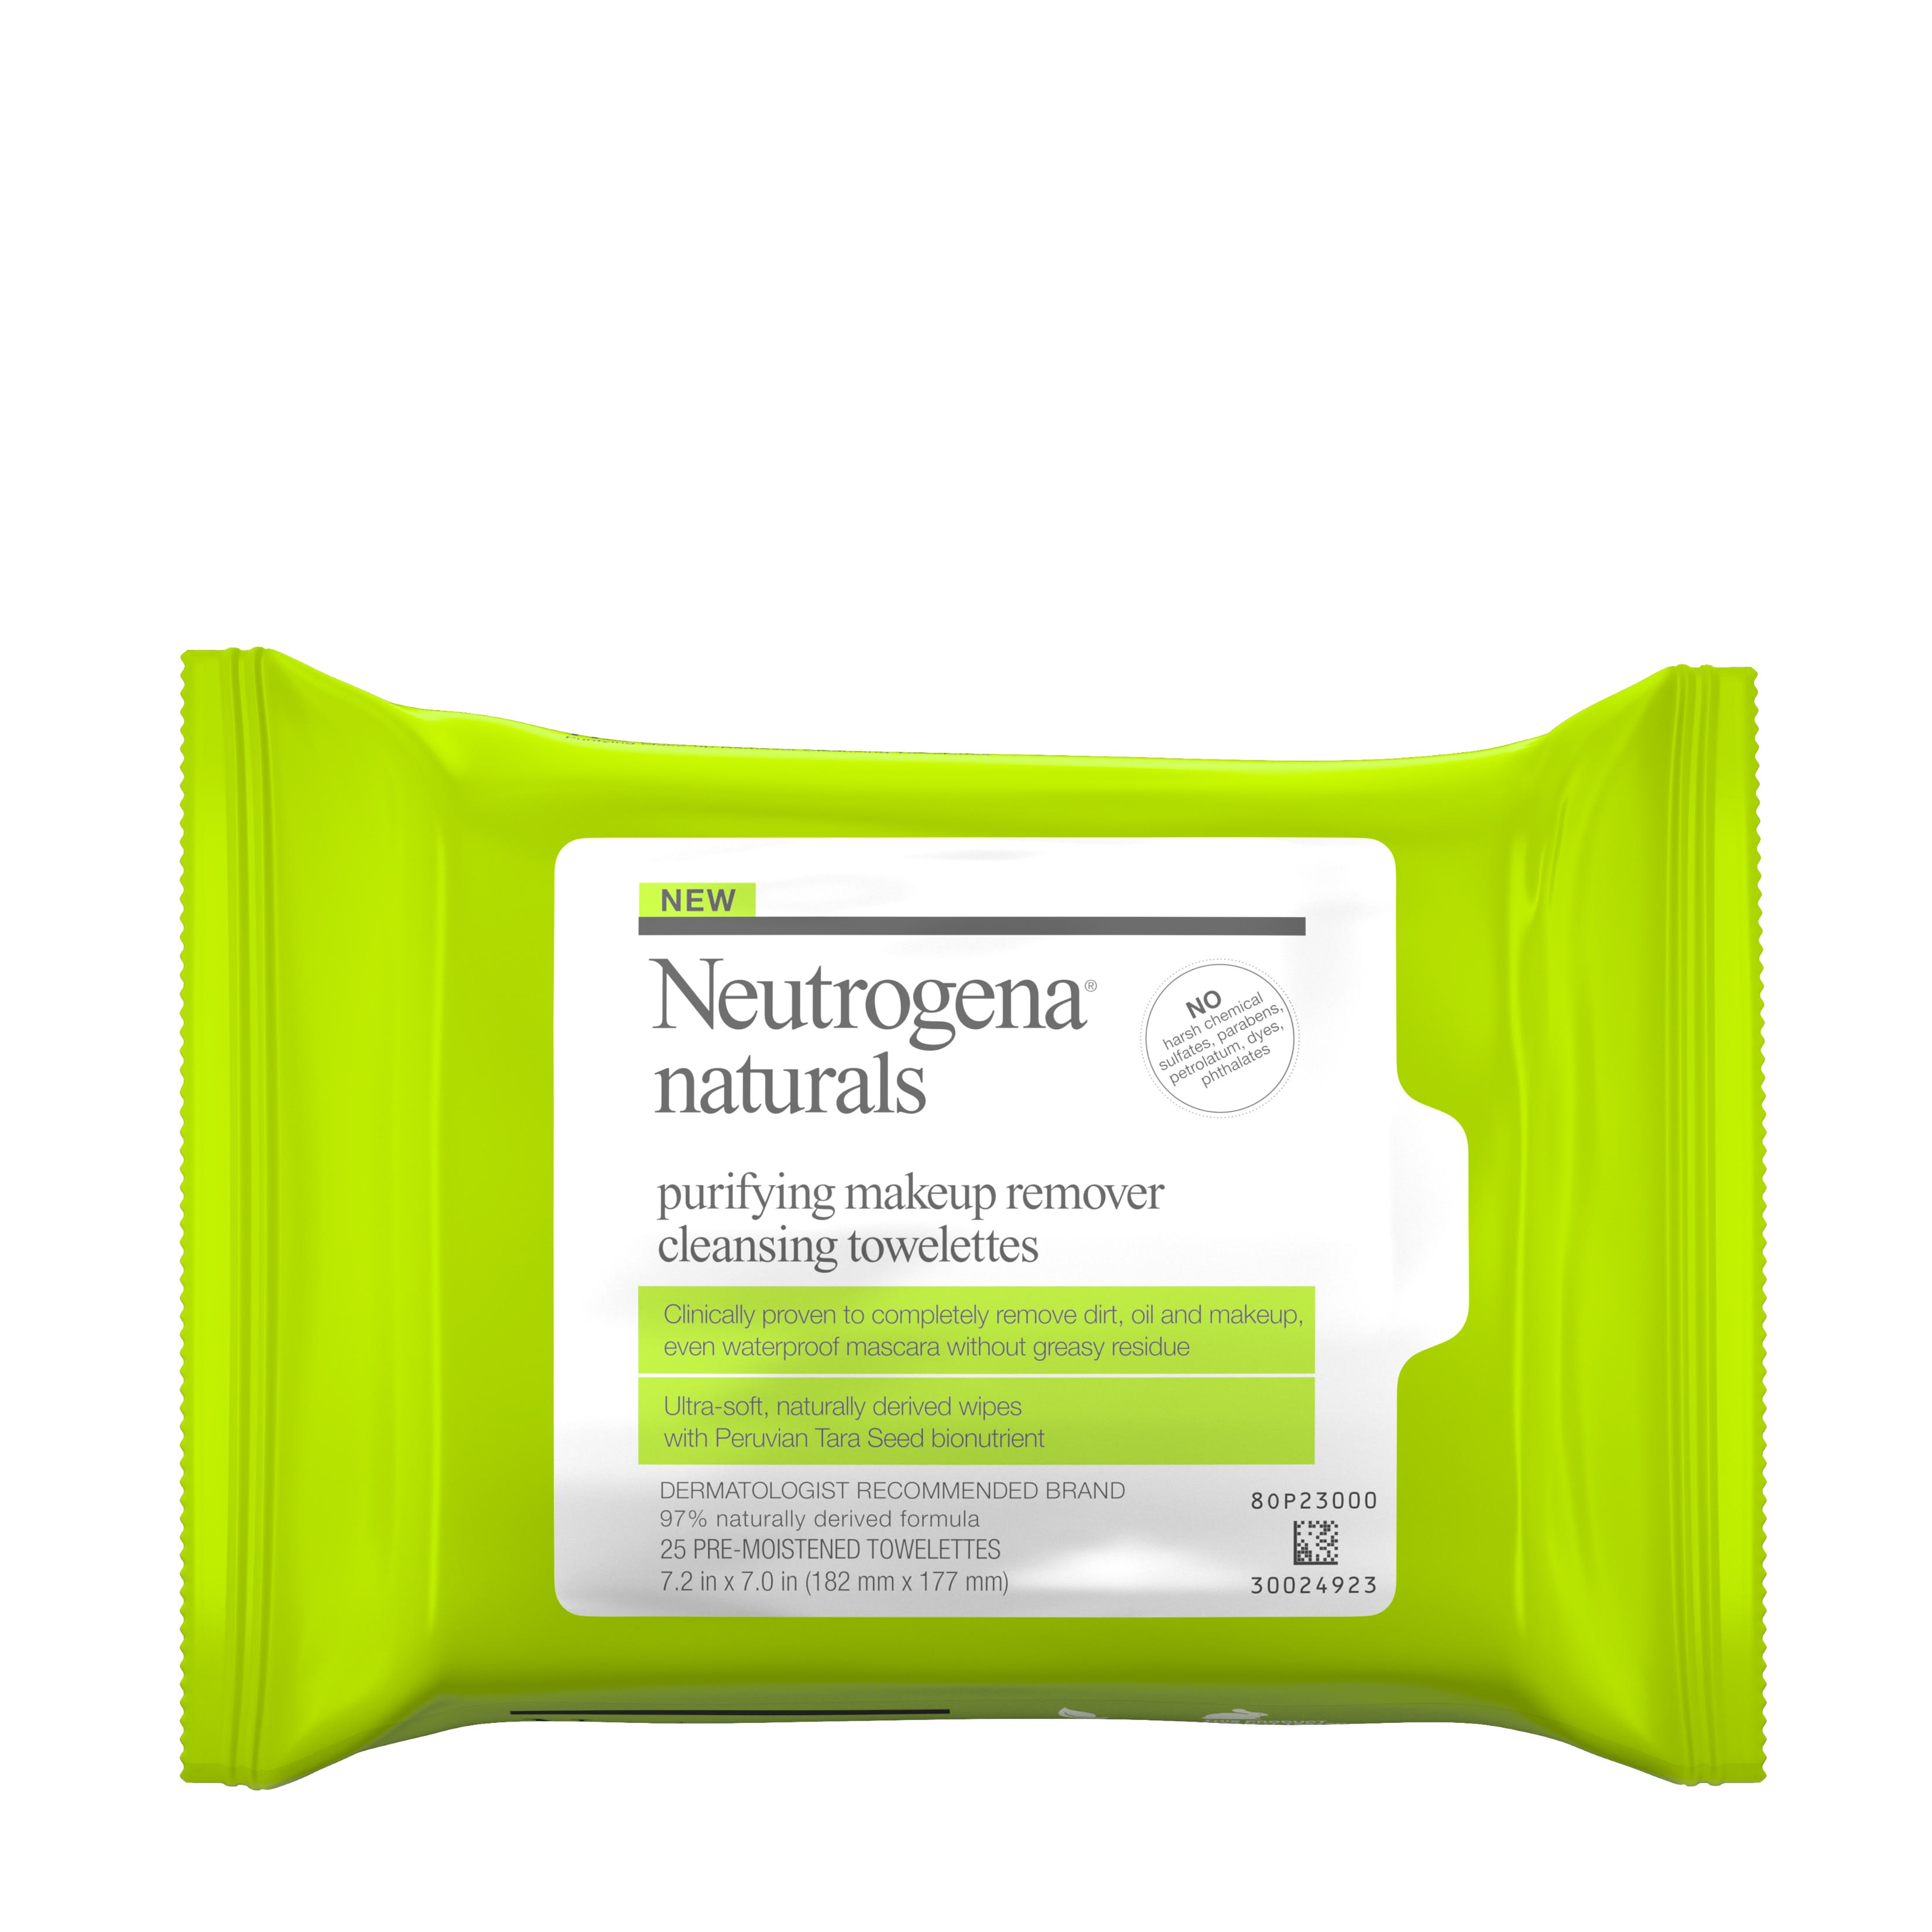 Neutrogena Naturals Purifying Makeup Remover Cleansing Wipes, 25 ct. - image 1 of 9